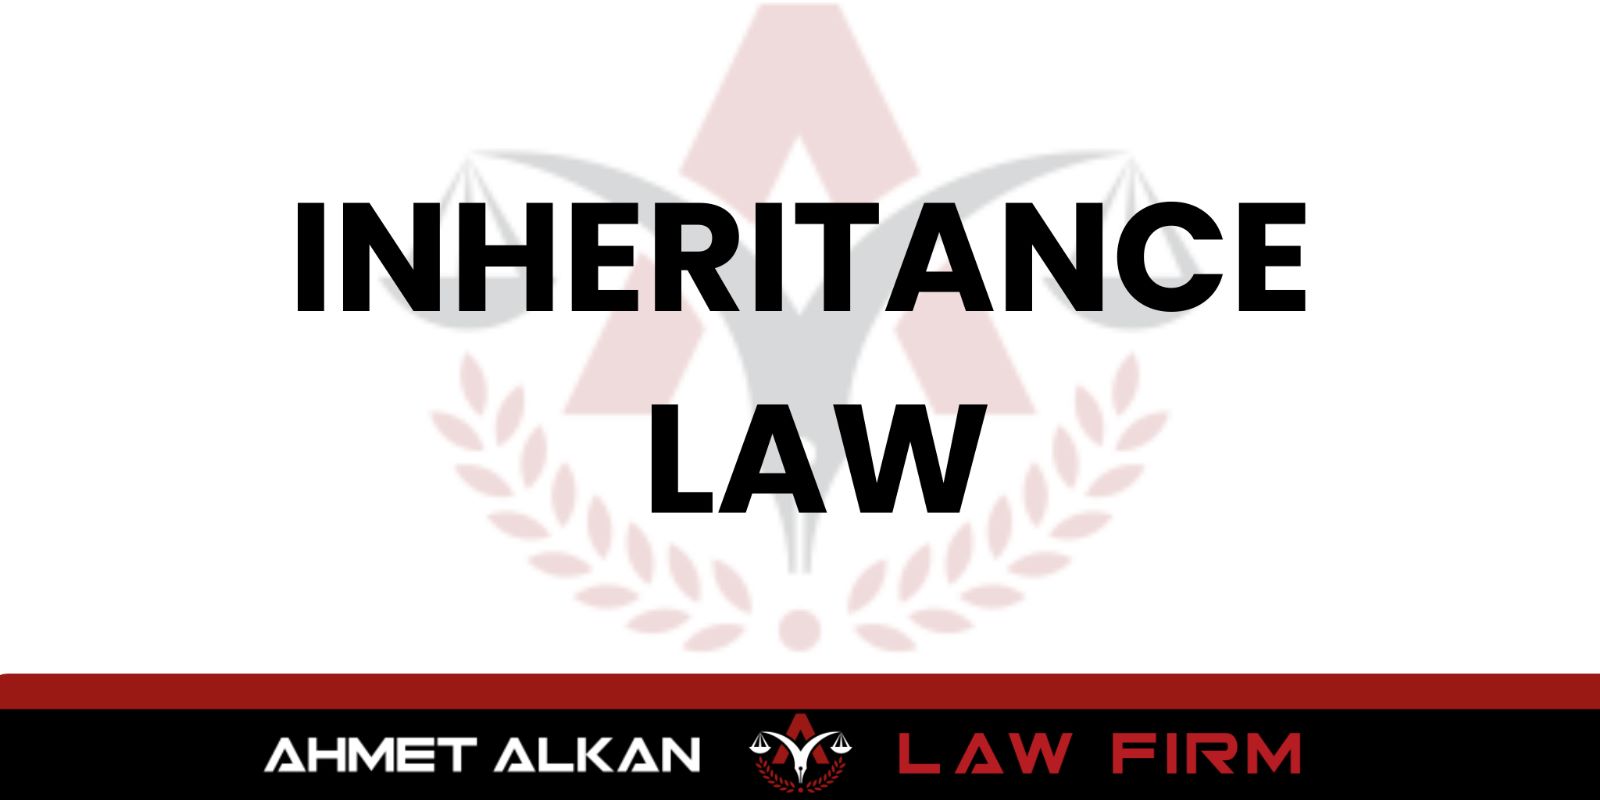 Antalya inheritance lawyer performs legal consultancy & attorneyship services in legal business, transactions, disputes and cases that fall within the field of examination and regulation of inheritance law.